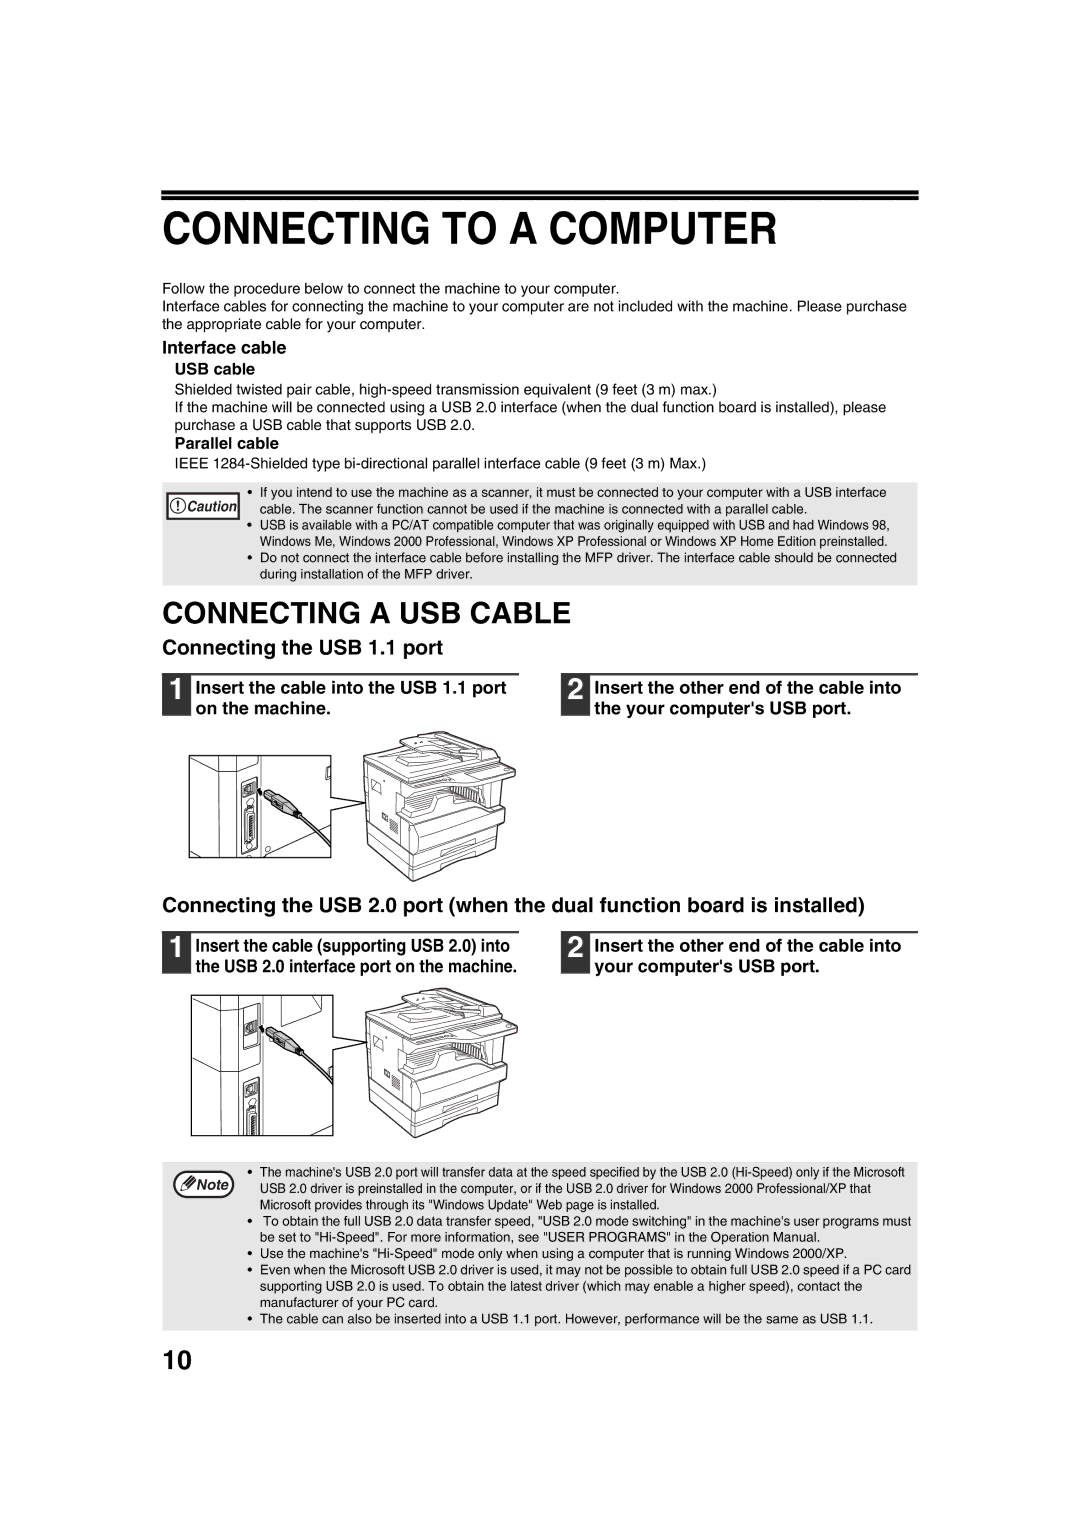 Sharp AR-M205, AR-M160 Connecting to a Computer, Connecting a USB Cable, Connecting the USB 1.1 port, Interface cable 